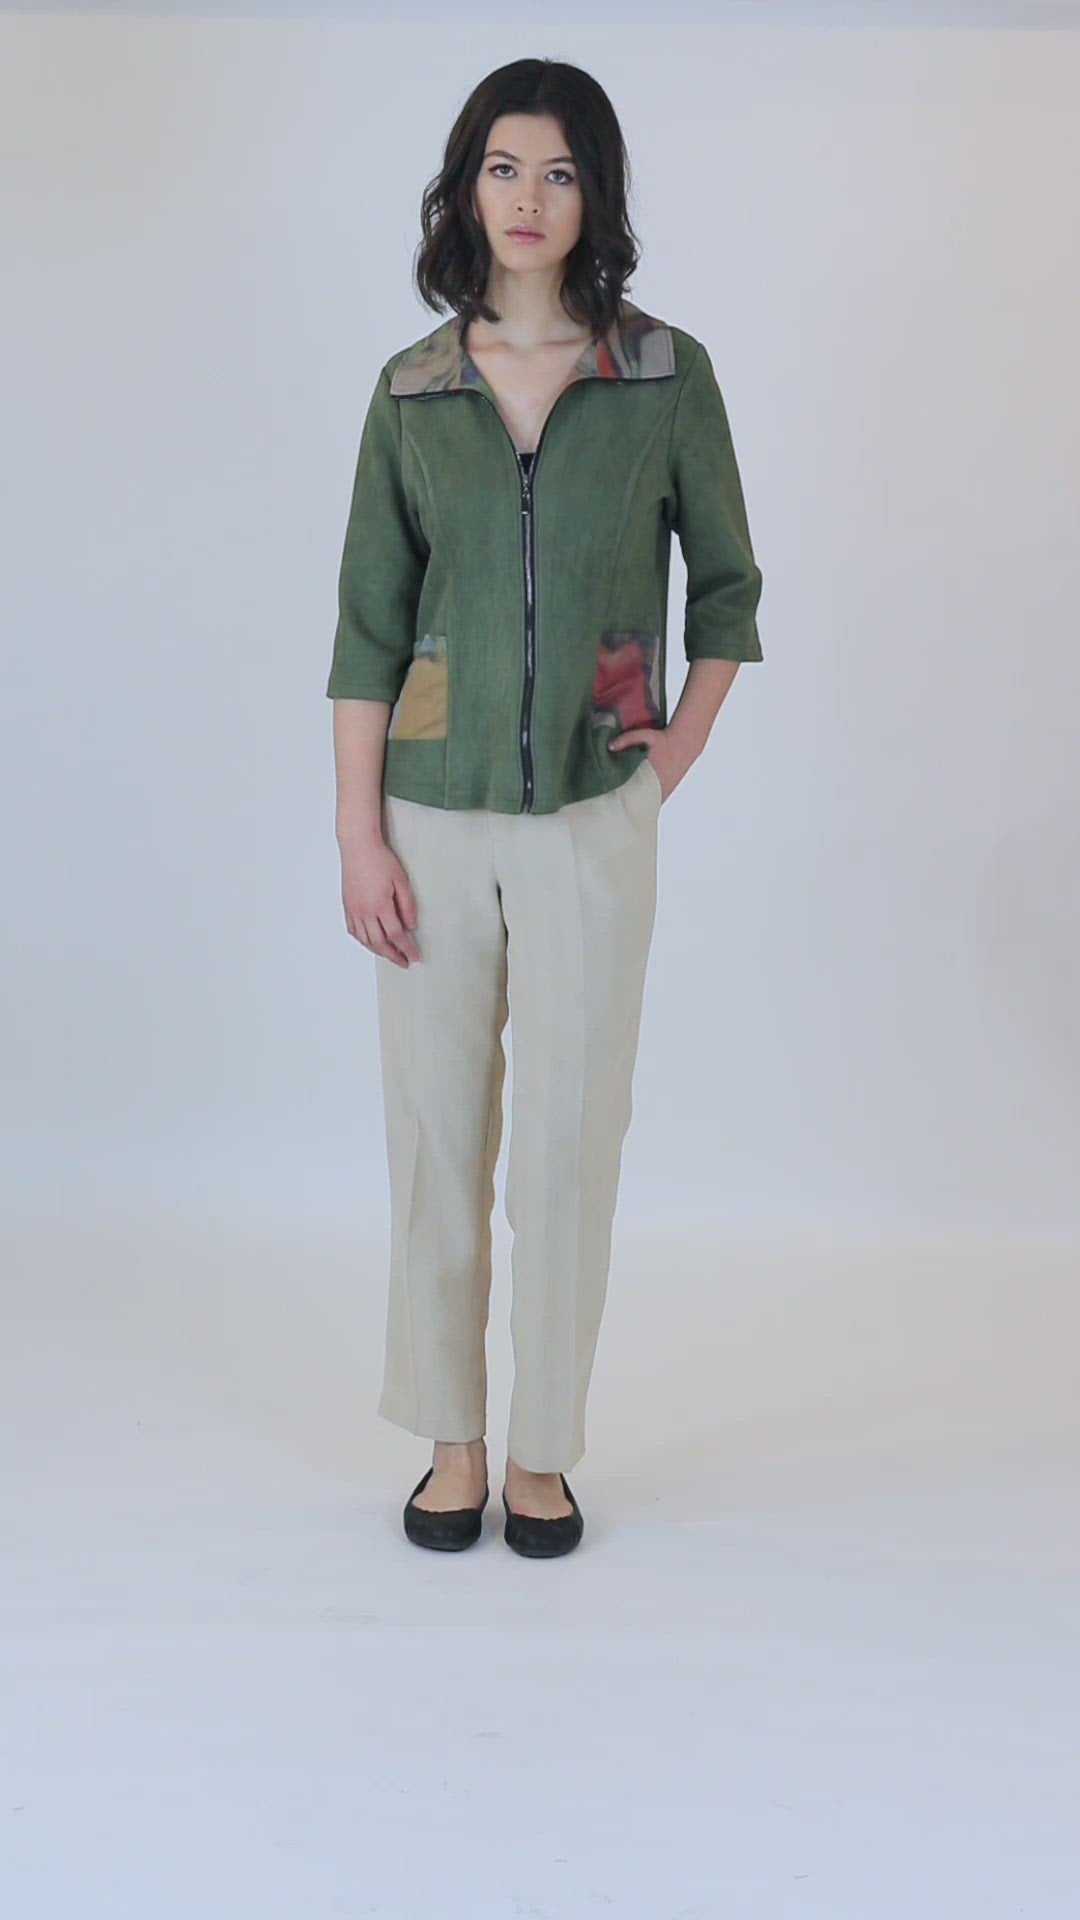 THE FASHION TOP IN OLIVE GREEN